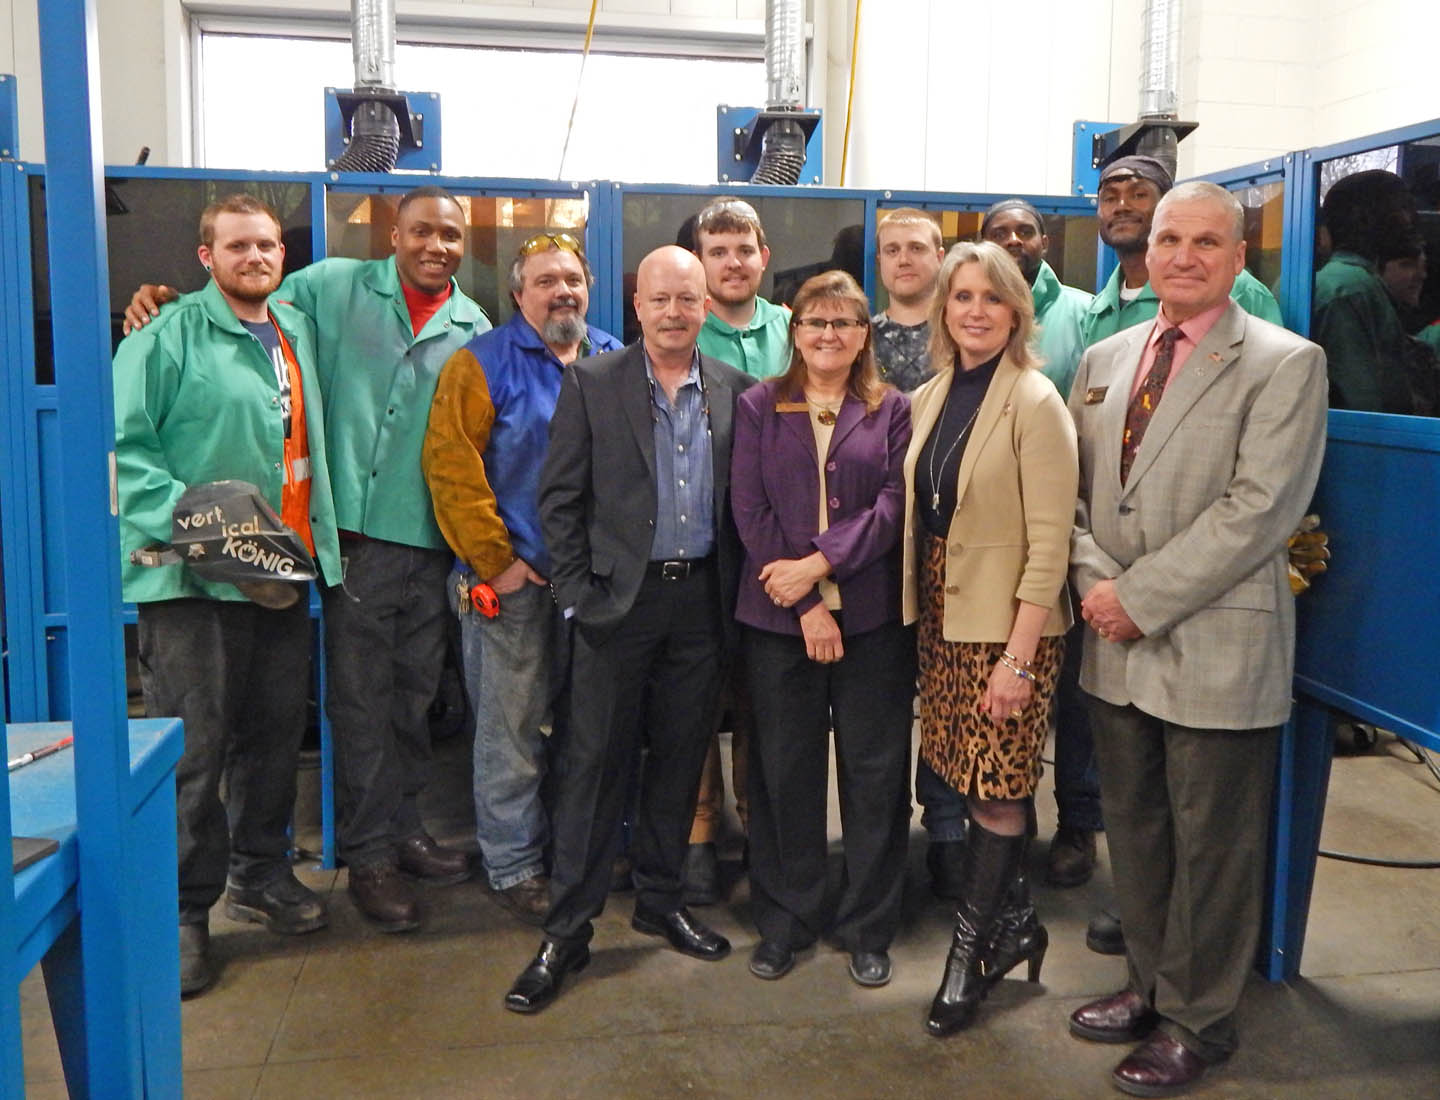 Ellmers impressed by CCCC workforce training at Innovation Center